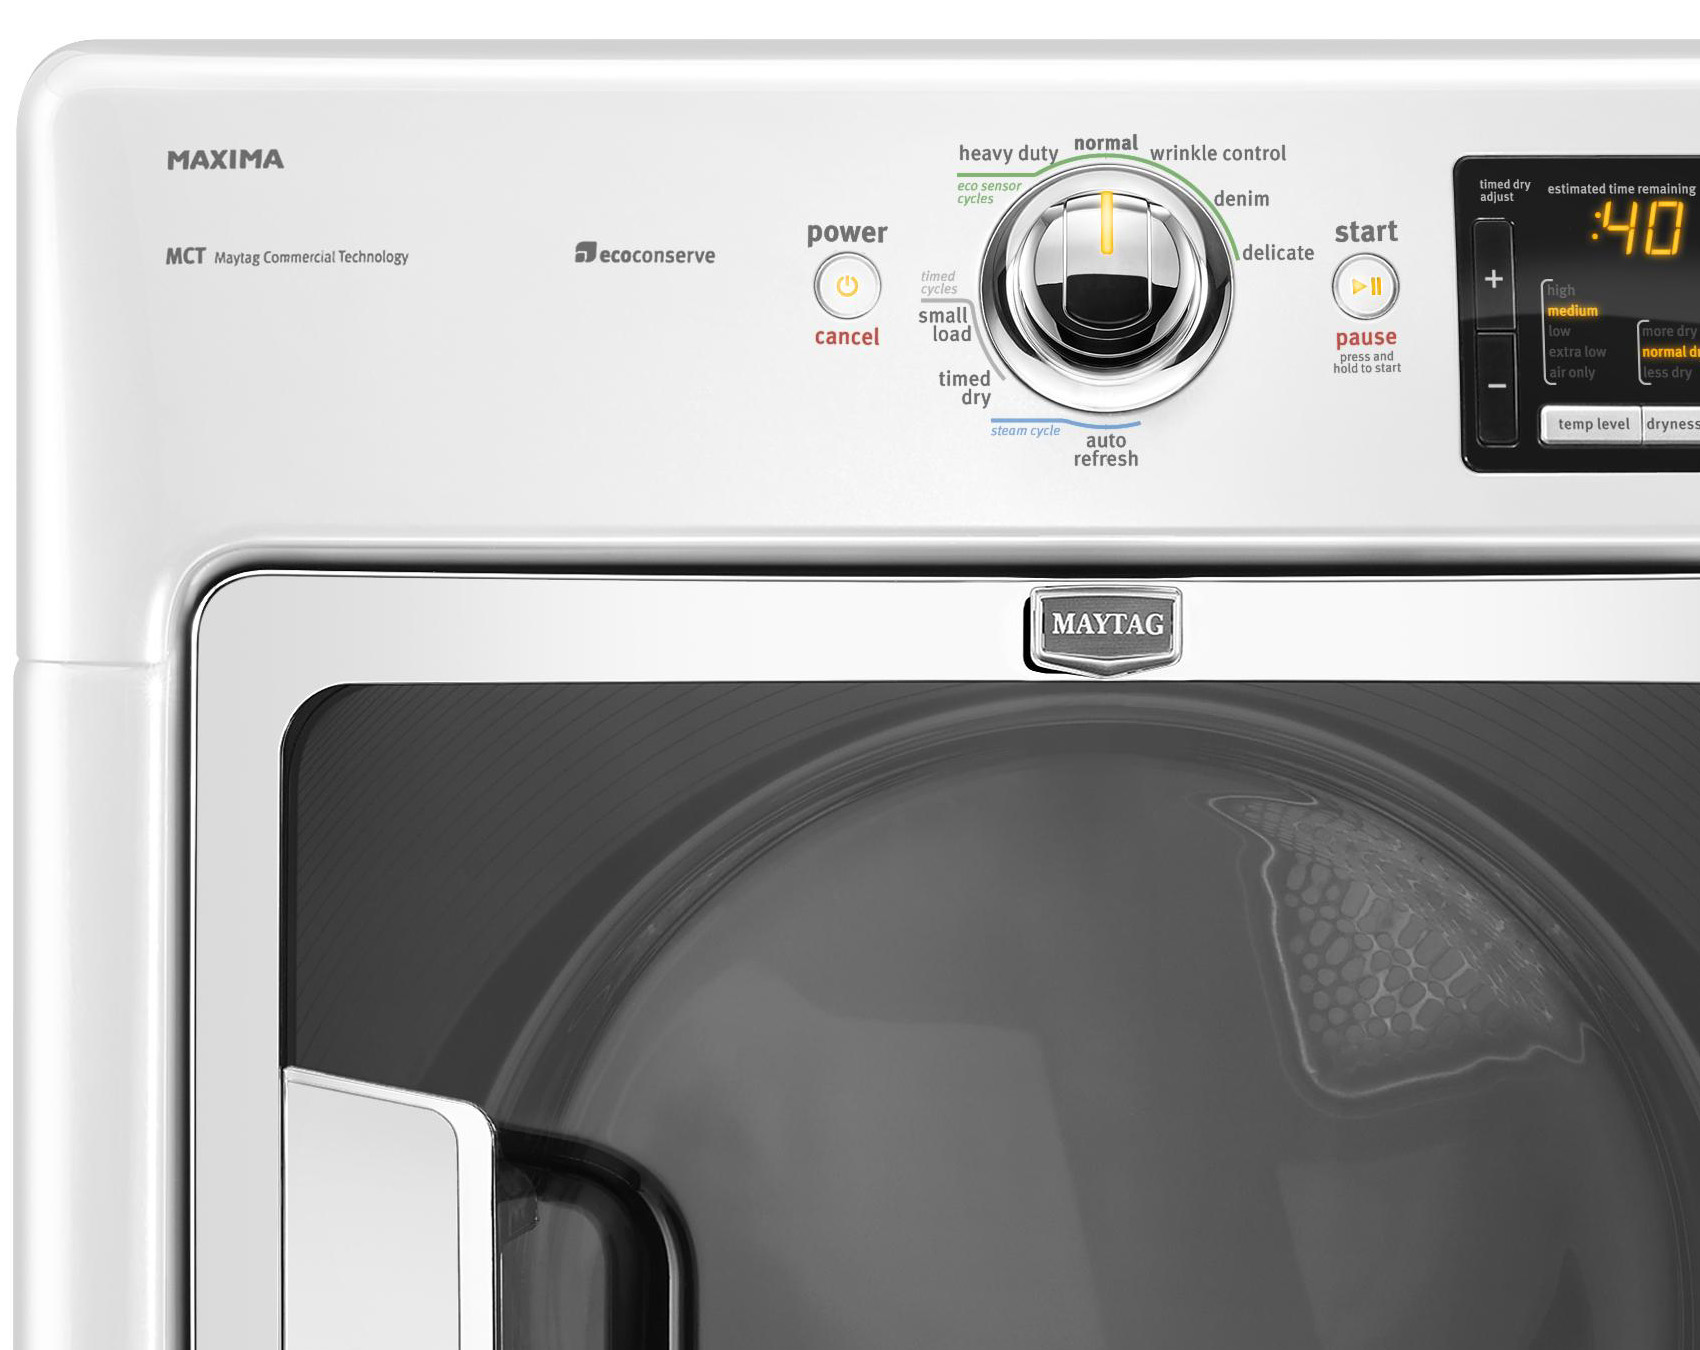 how to reset Maytag dryer 2.0